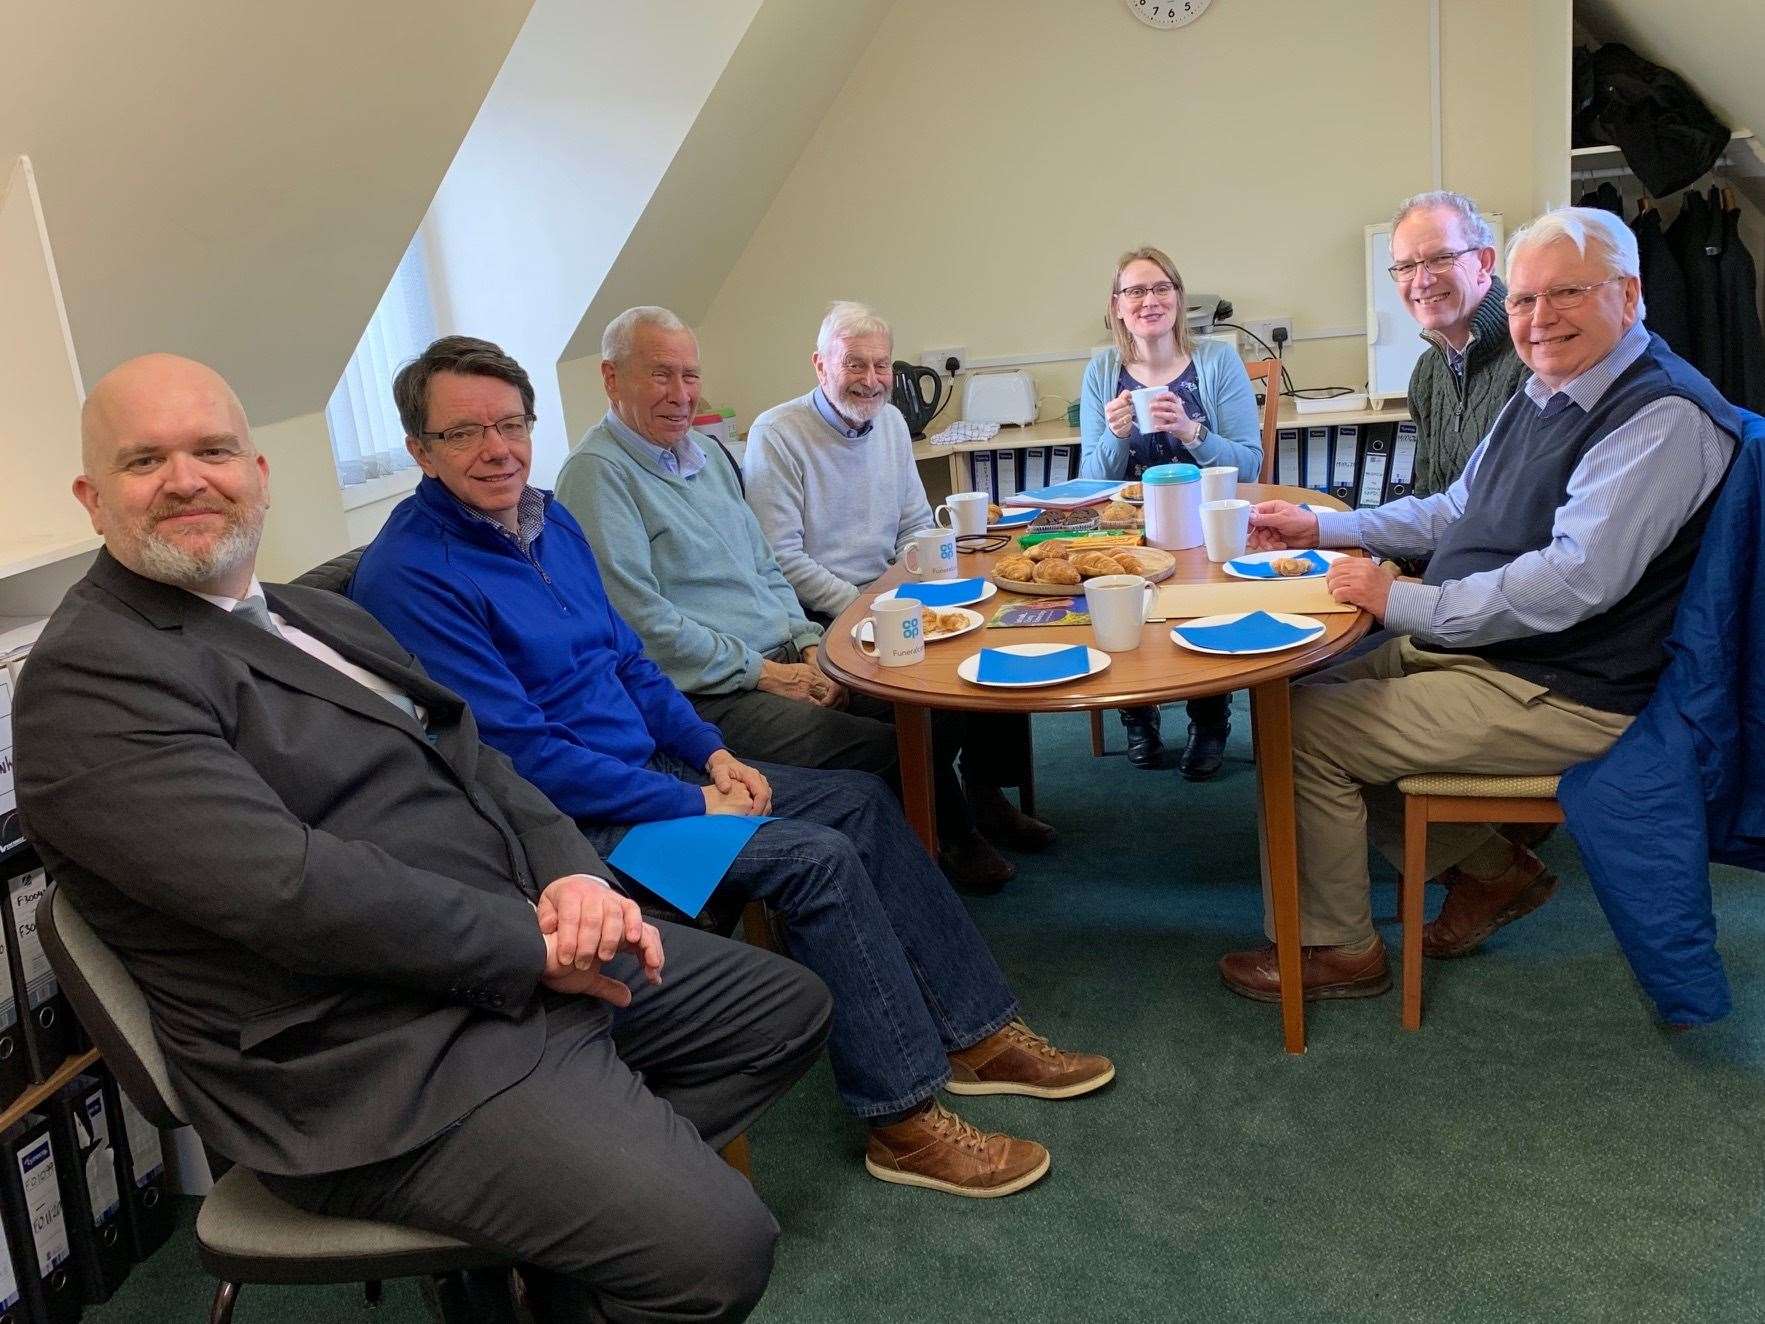 Co-op Funeralcare's Scott Wilson Richard, Chris, Alan from Ellon Castle Gardens, Barbara Last Co-op member pioneer and Andy and Keith from Ellon's Men Shed discussing plans.